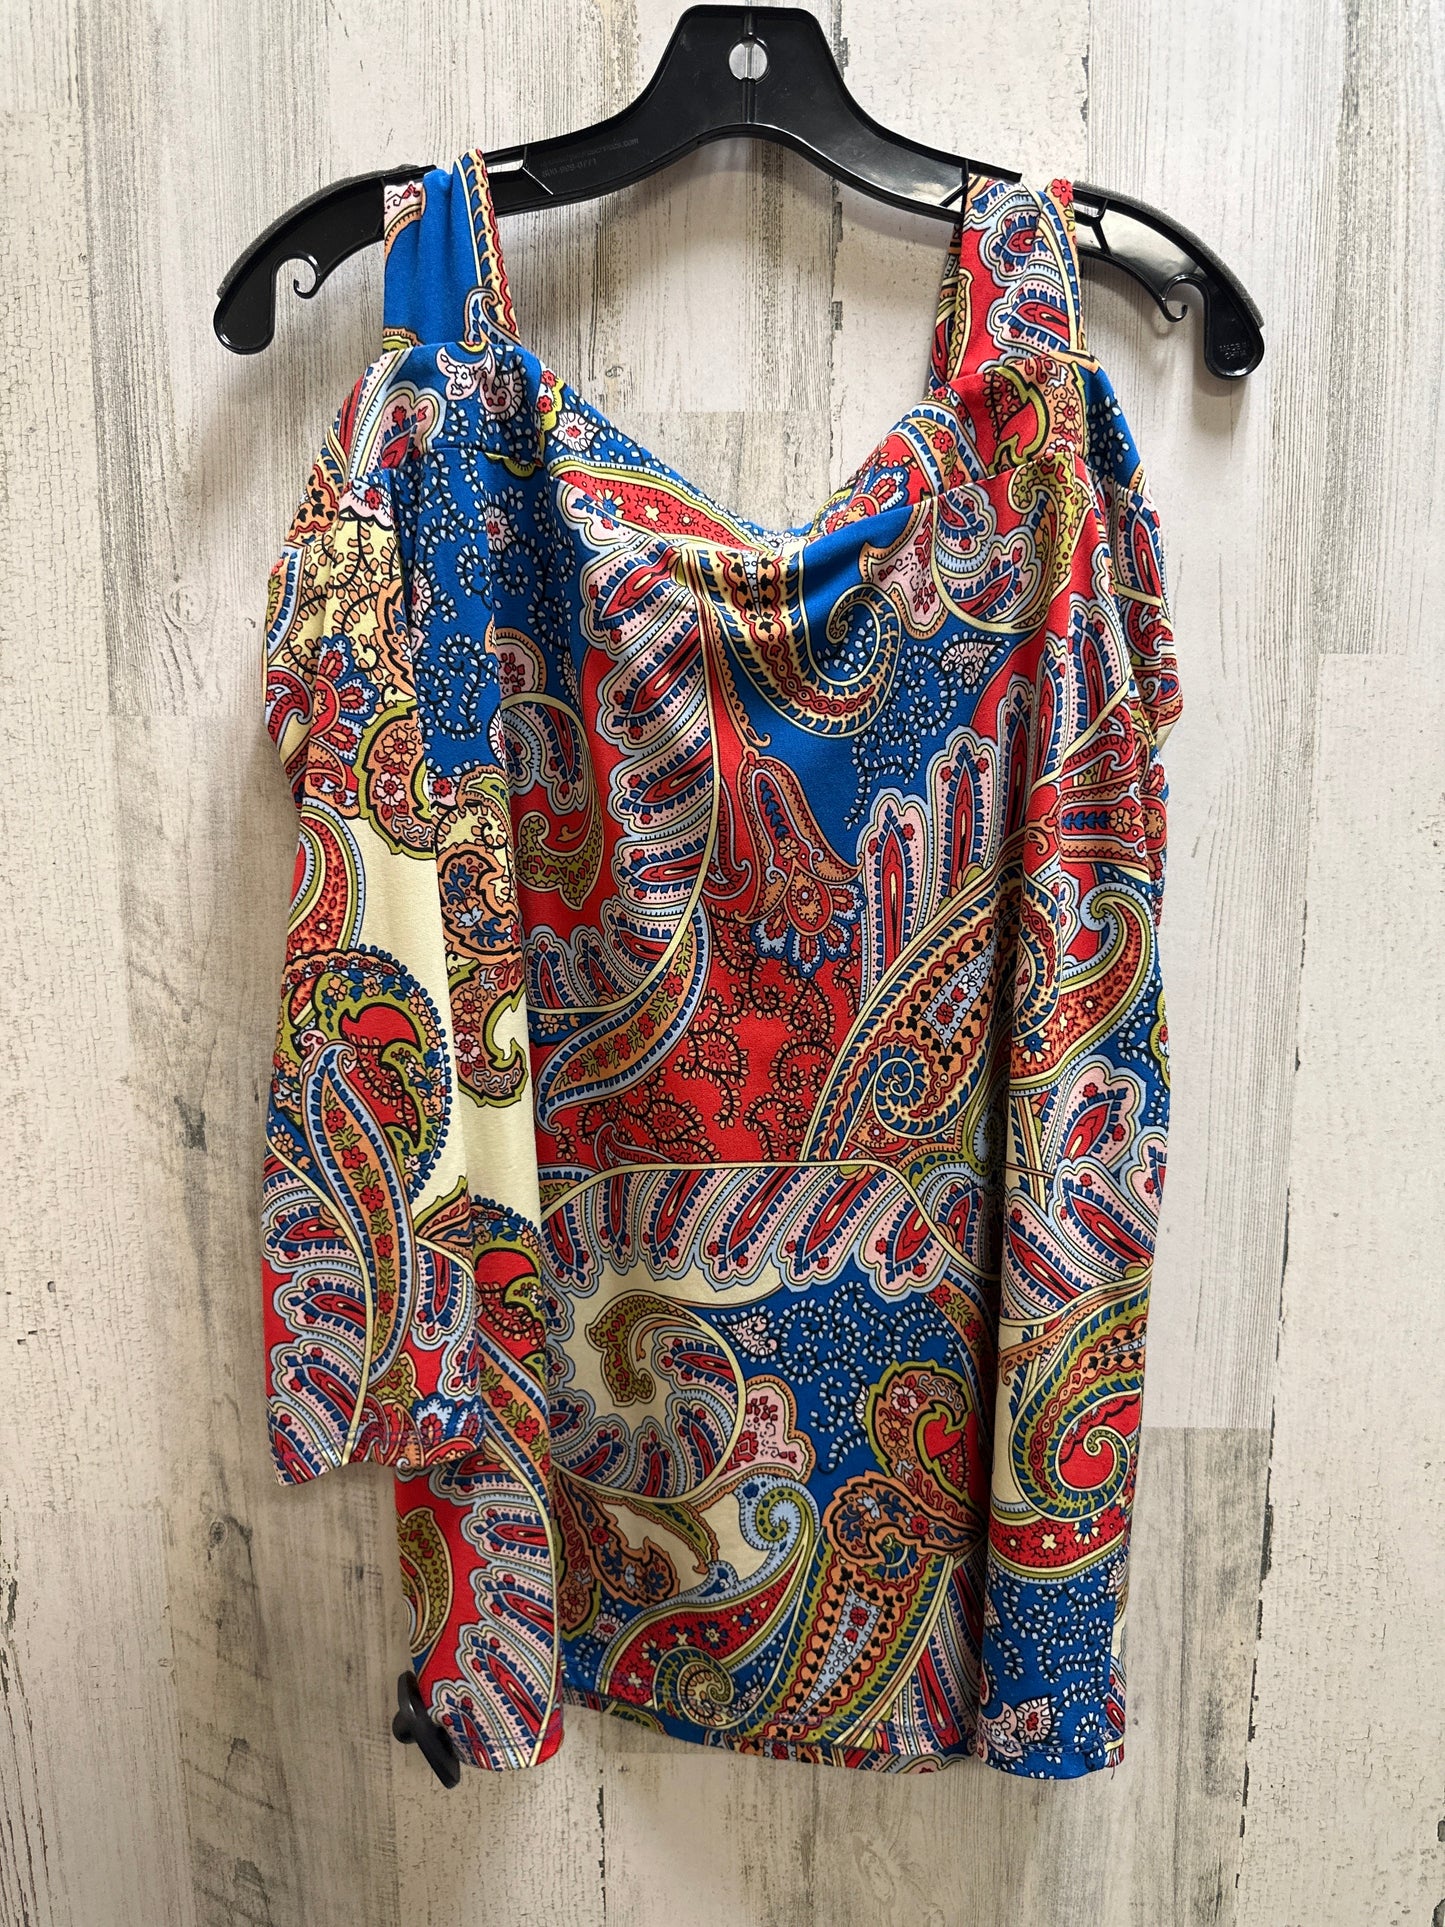 Multi-colored Top Short Sleeve Chicos, Size 2